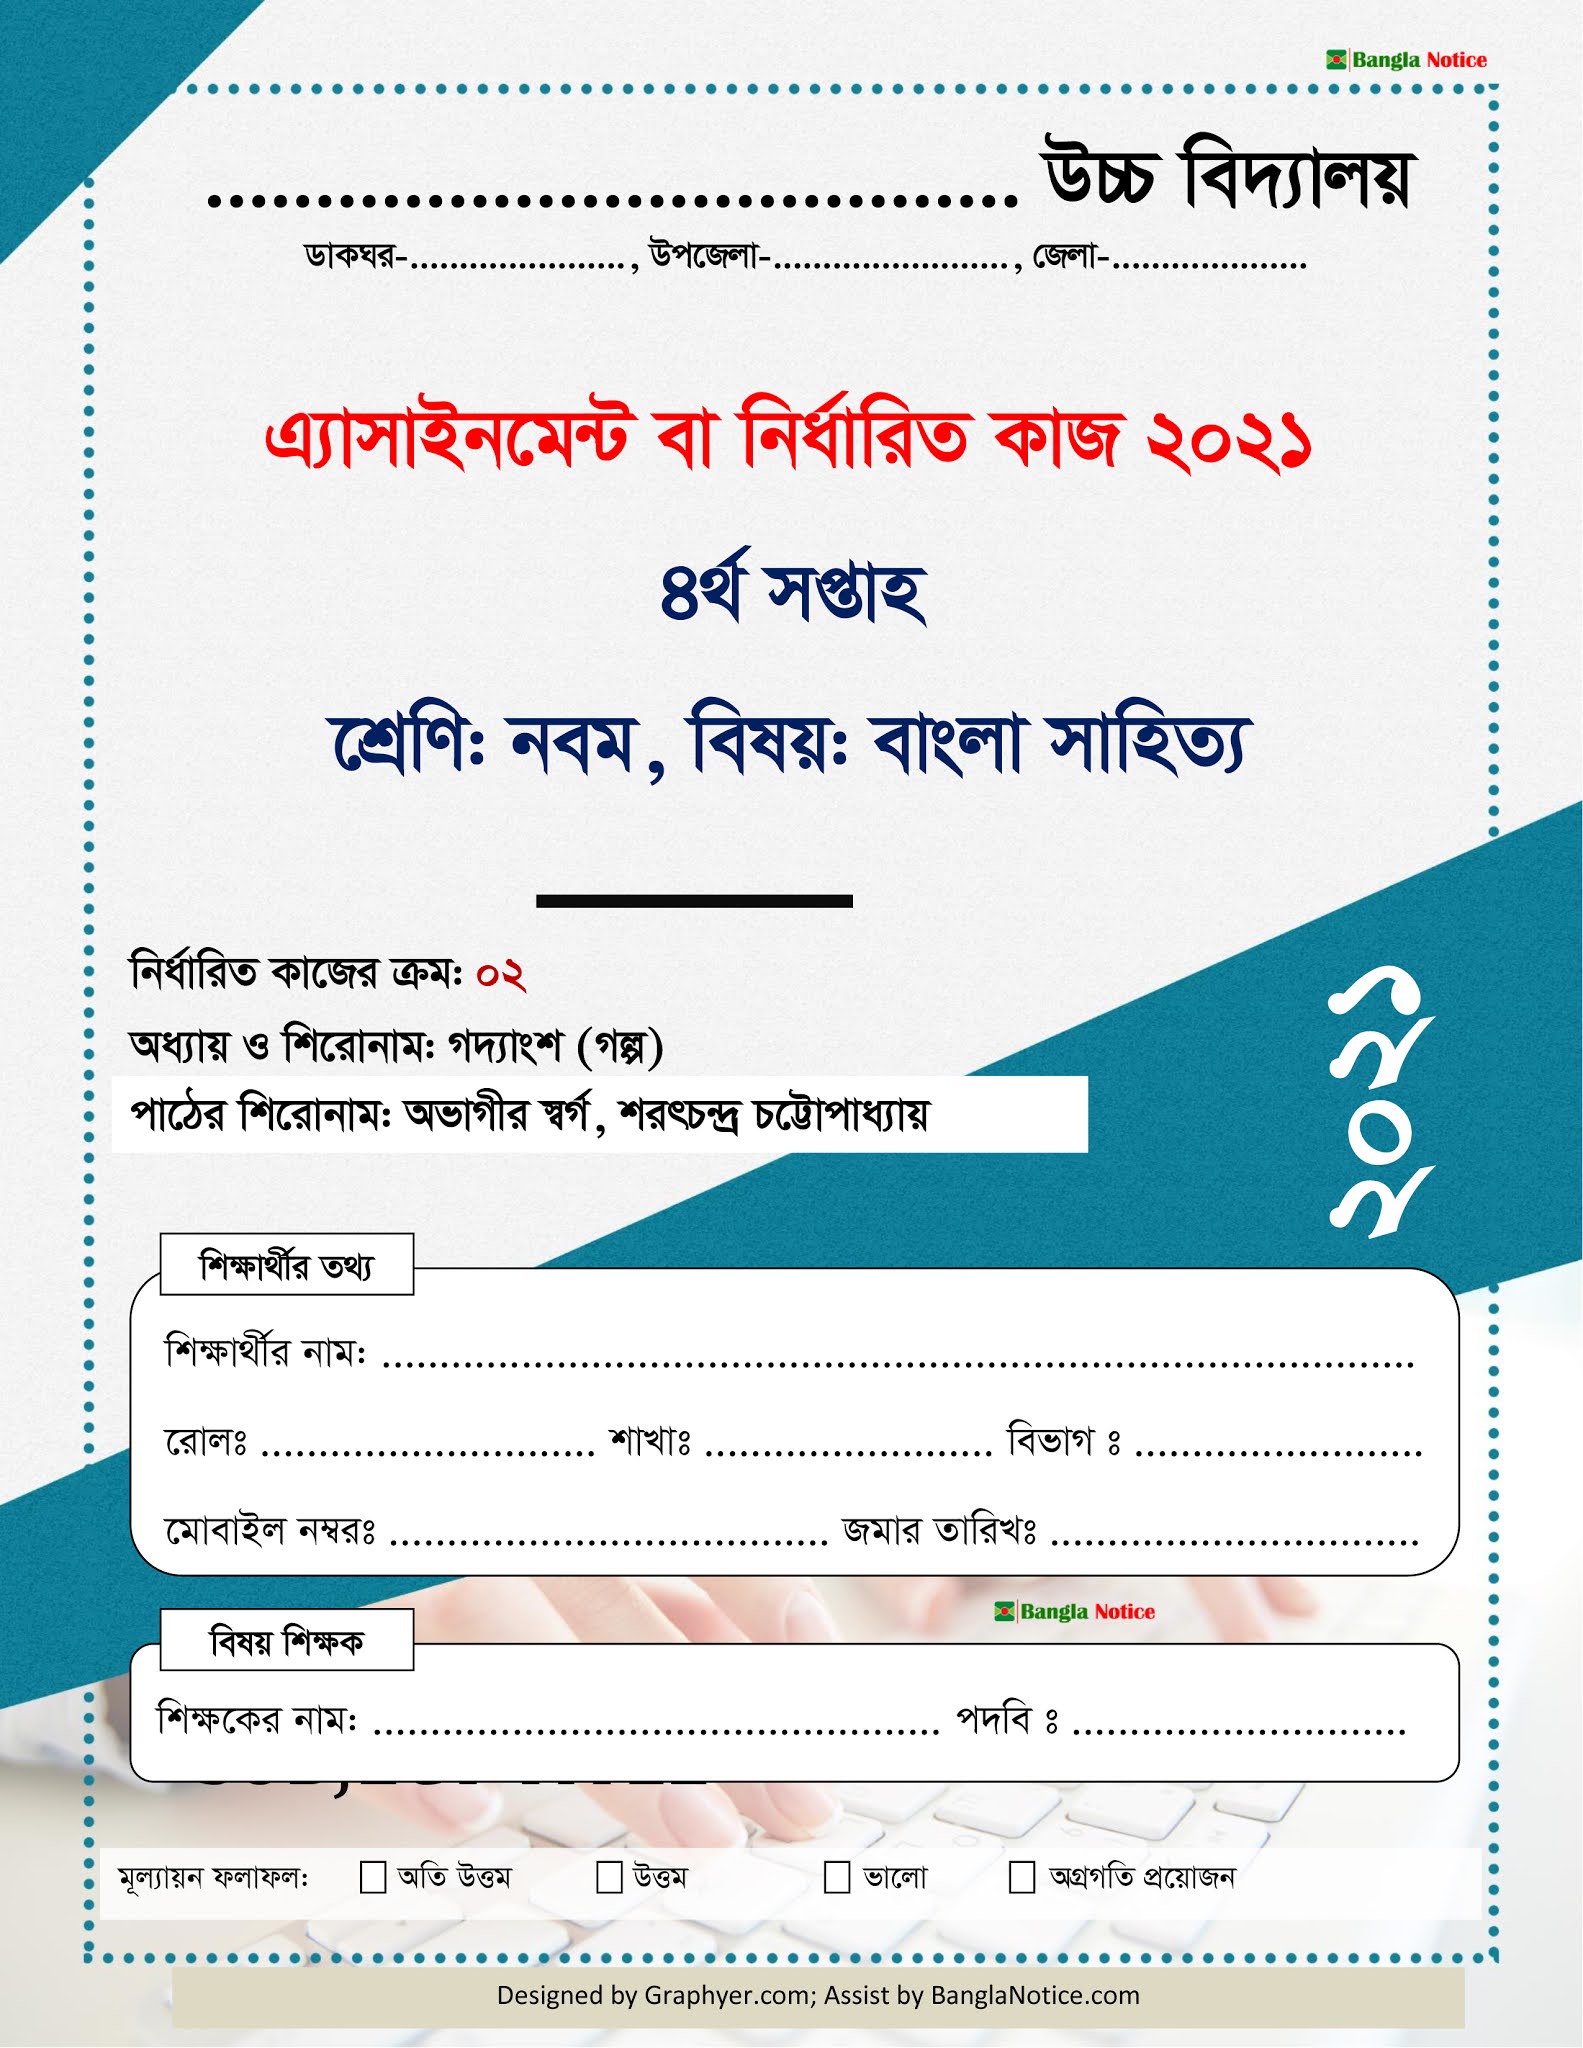 assignment front page bangla